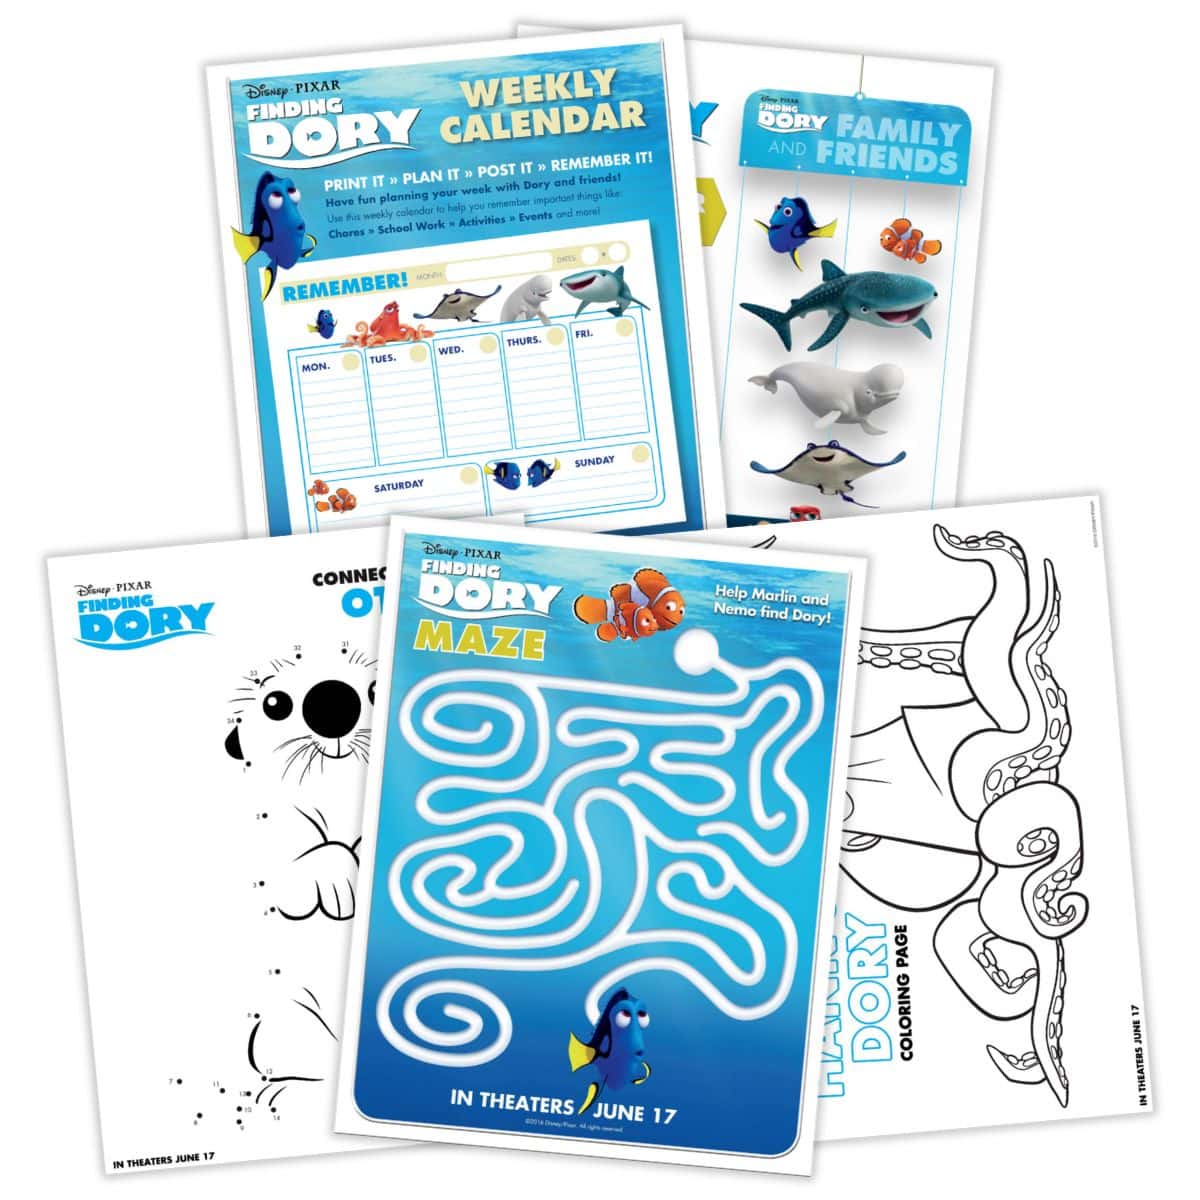 Printable finding Dory games and activity sheets.